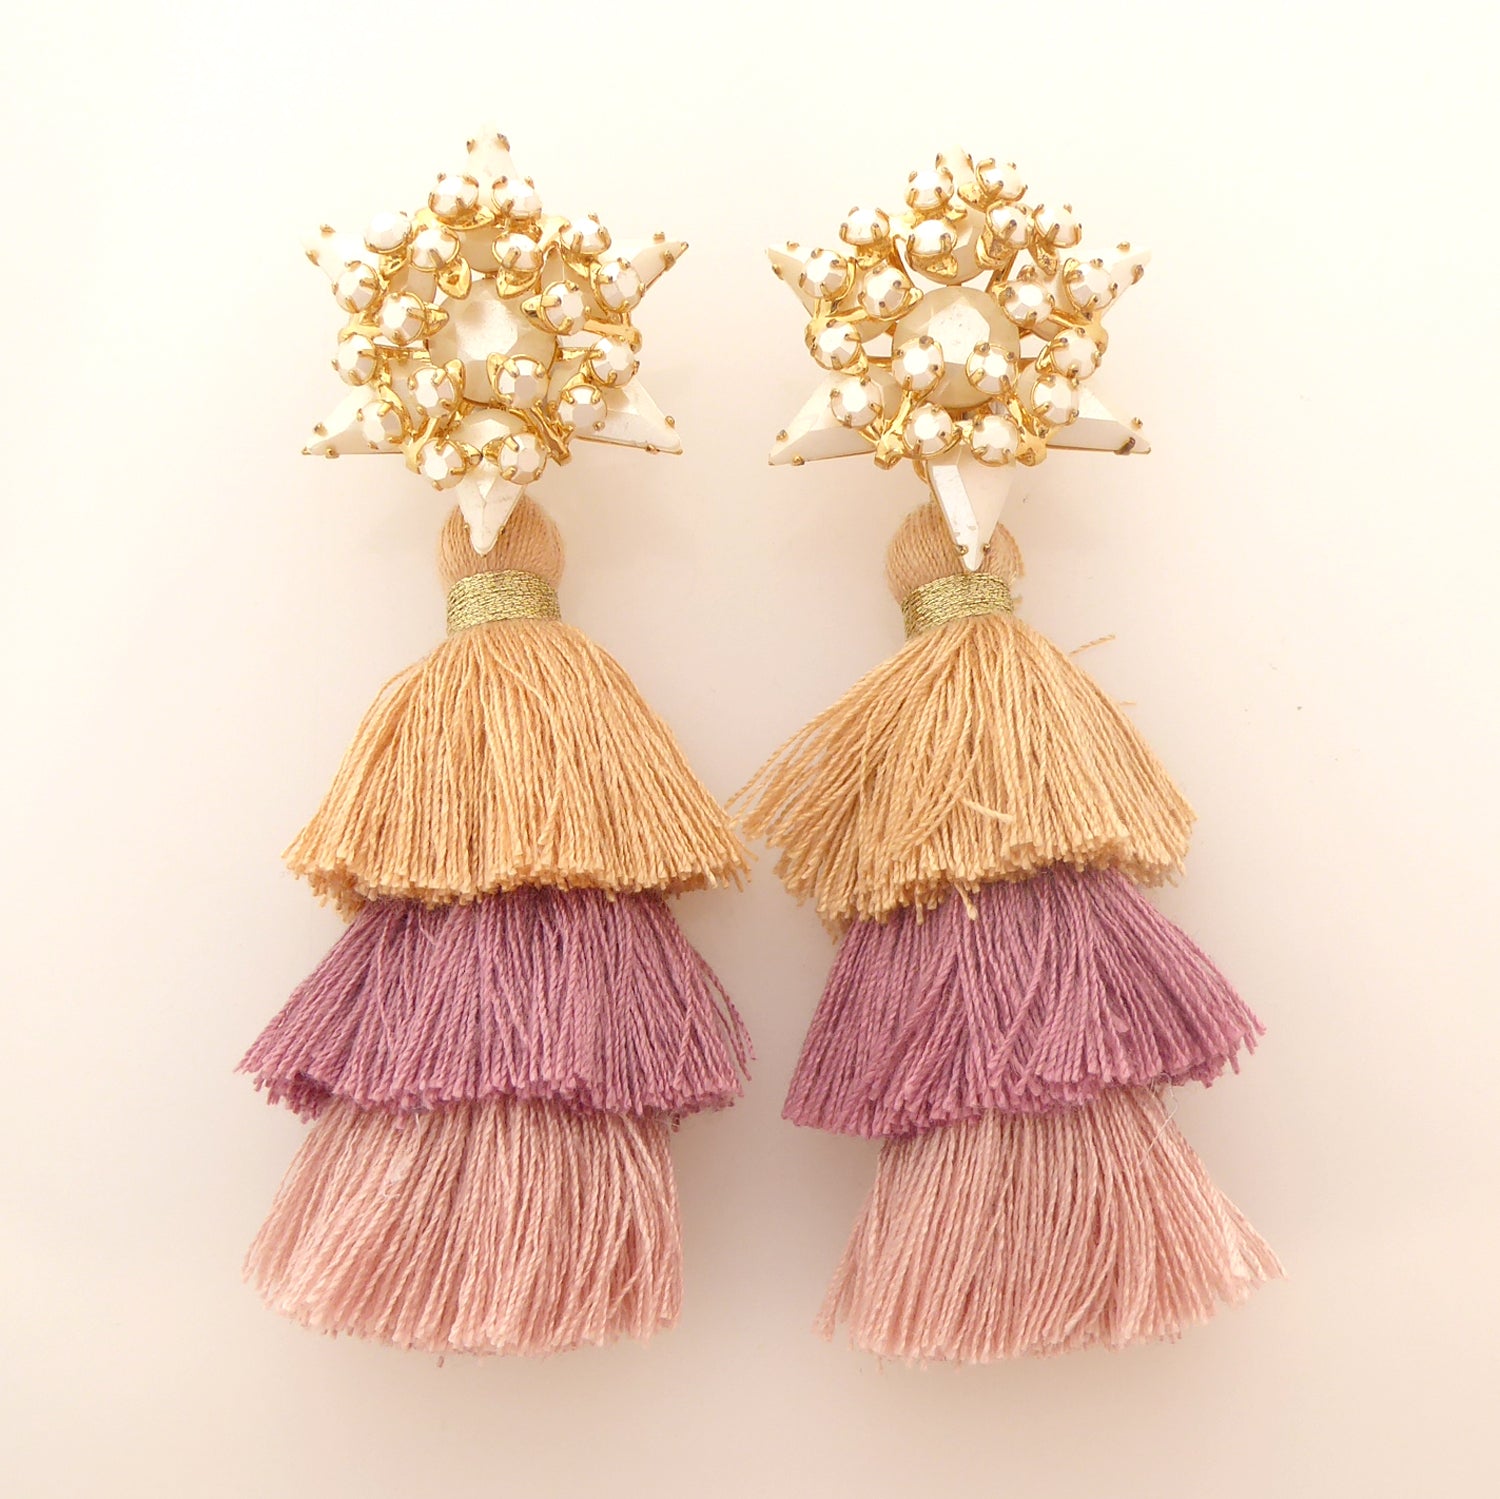 Pearly star and dusty rose tassel earrings